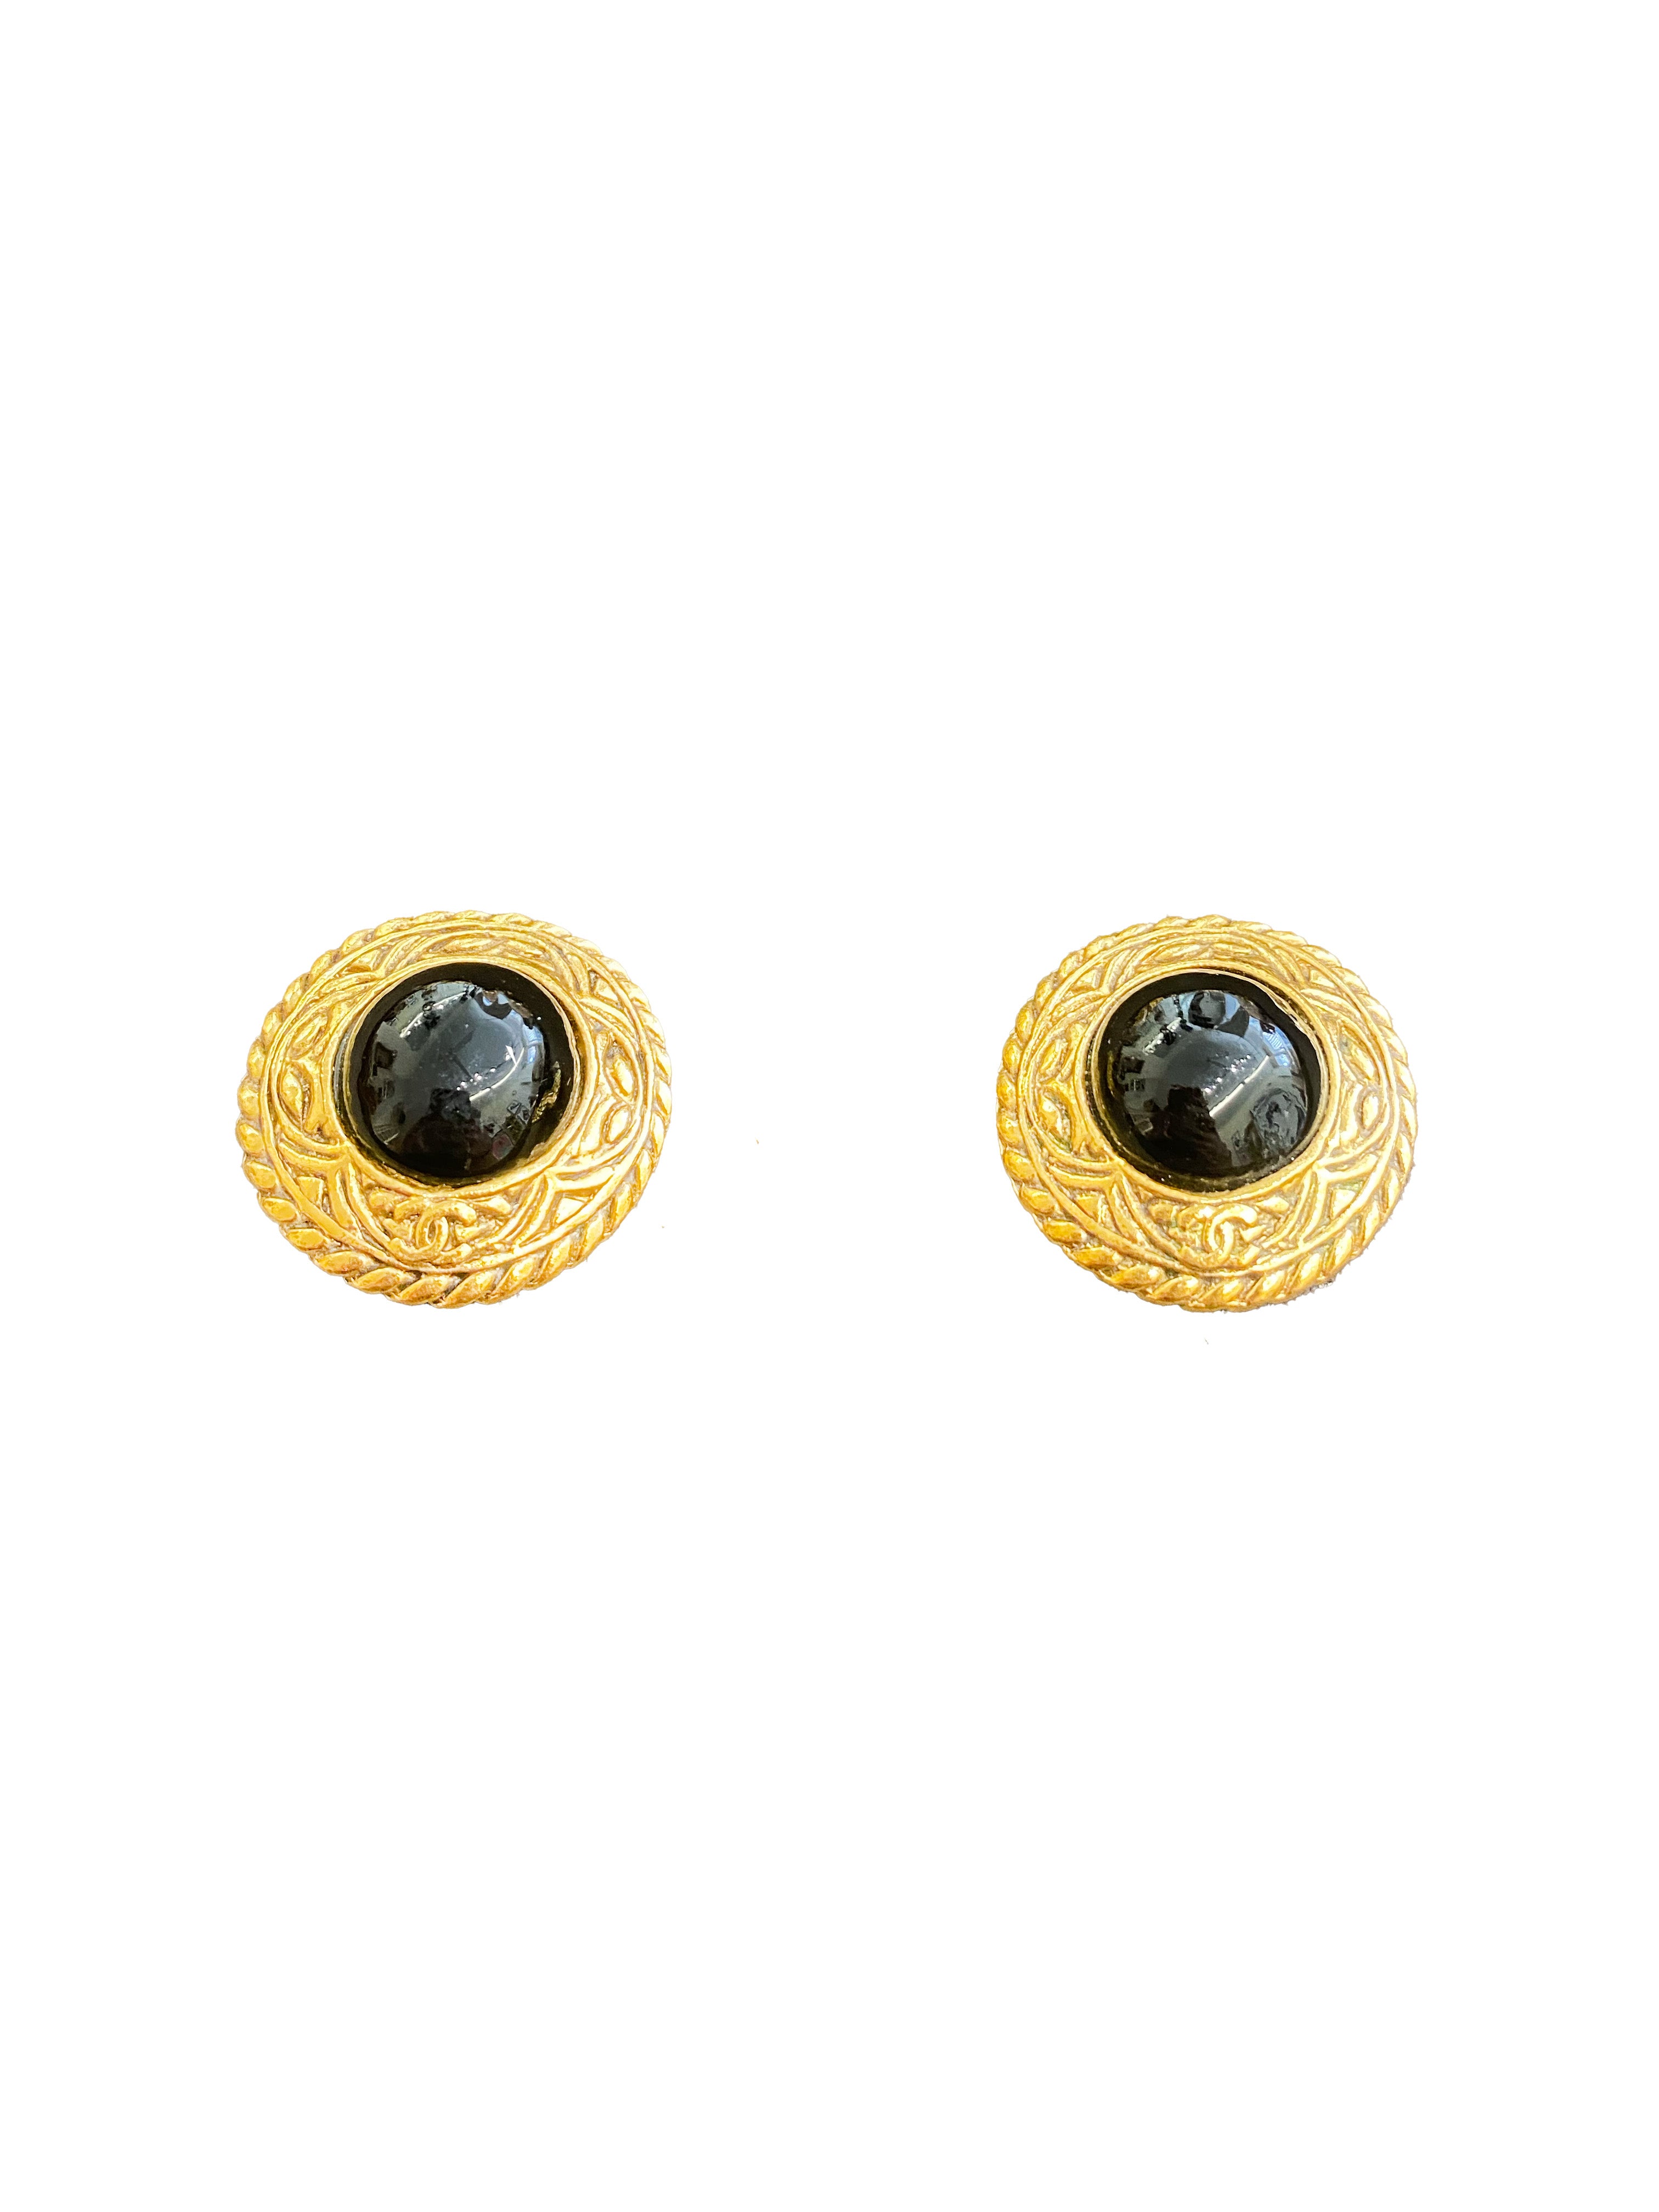 Chanel 1990s Black and Gold Logo Clip-on Earrings